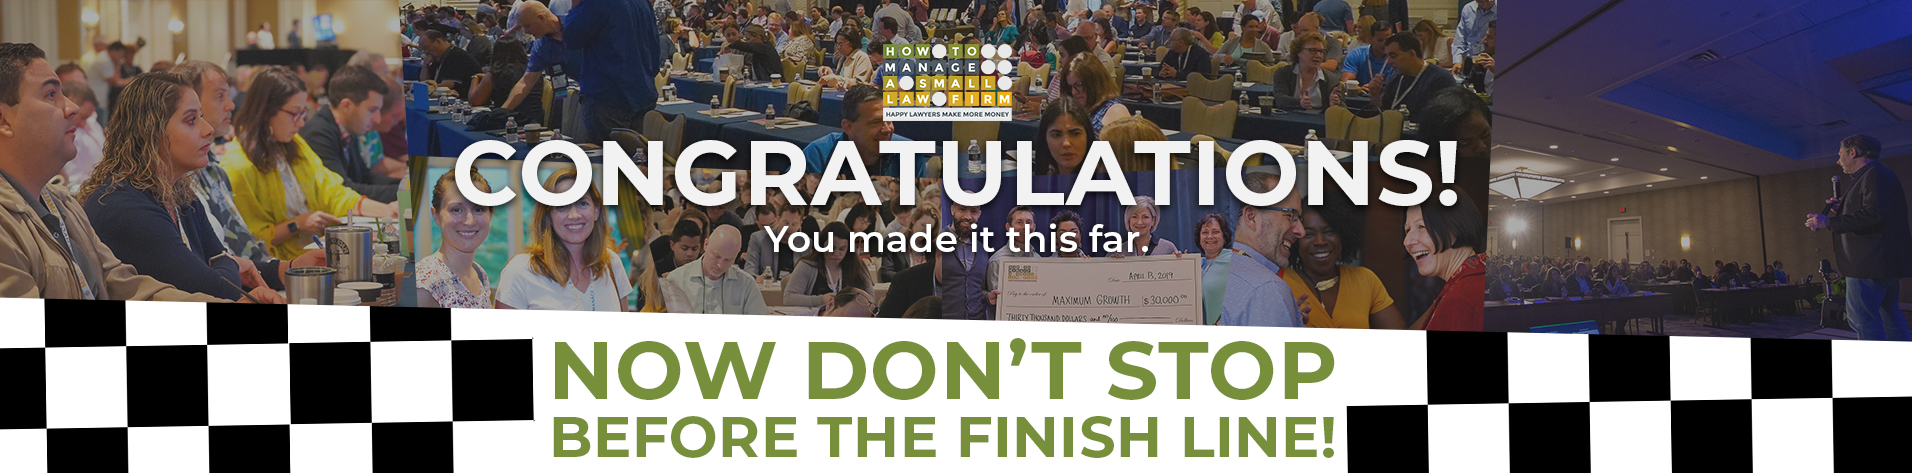 Congratulations! You made it this far. Now don't stop before the finish line!